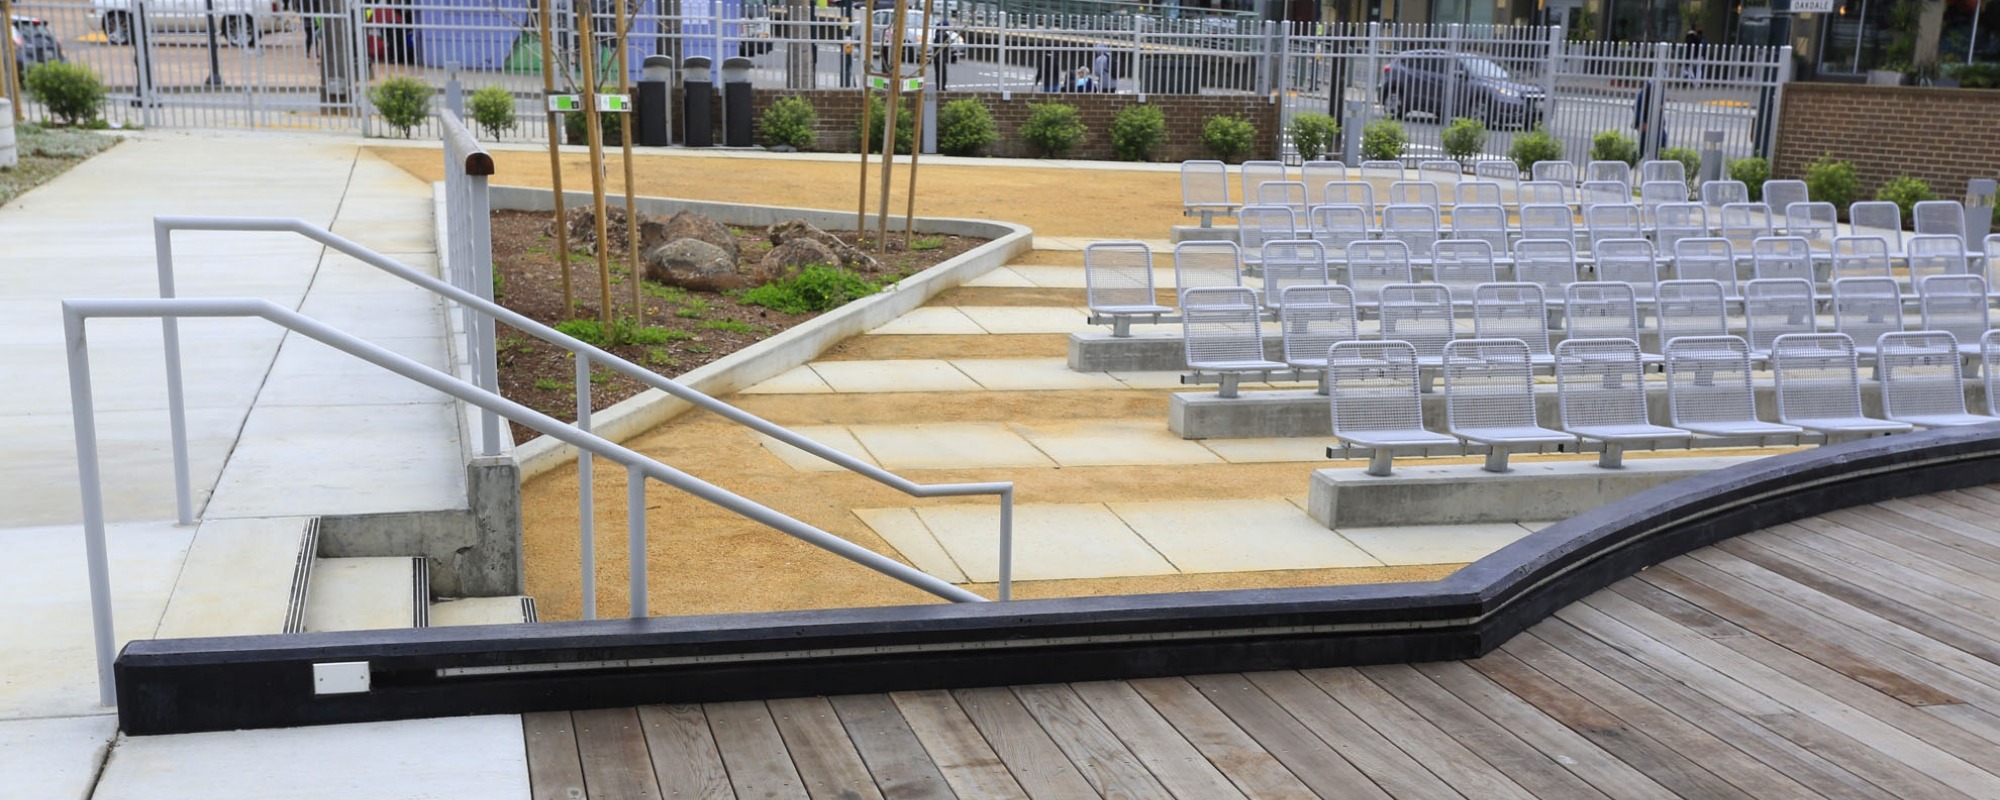 view of seating from deck